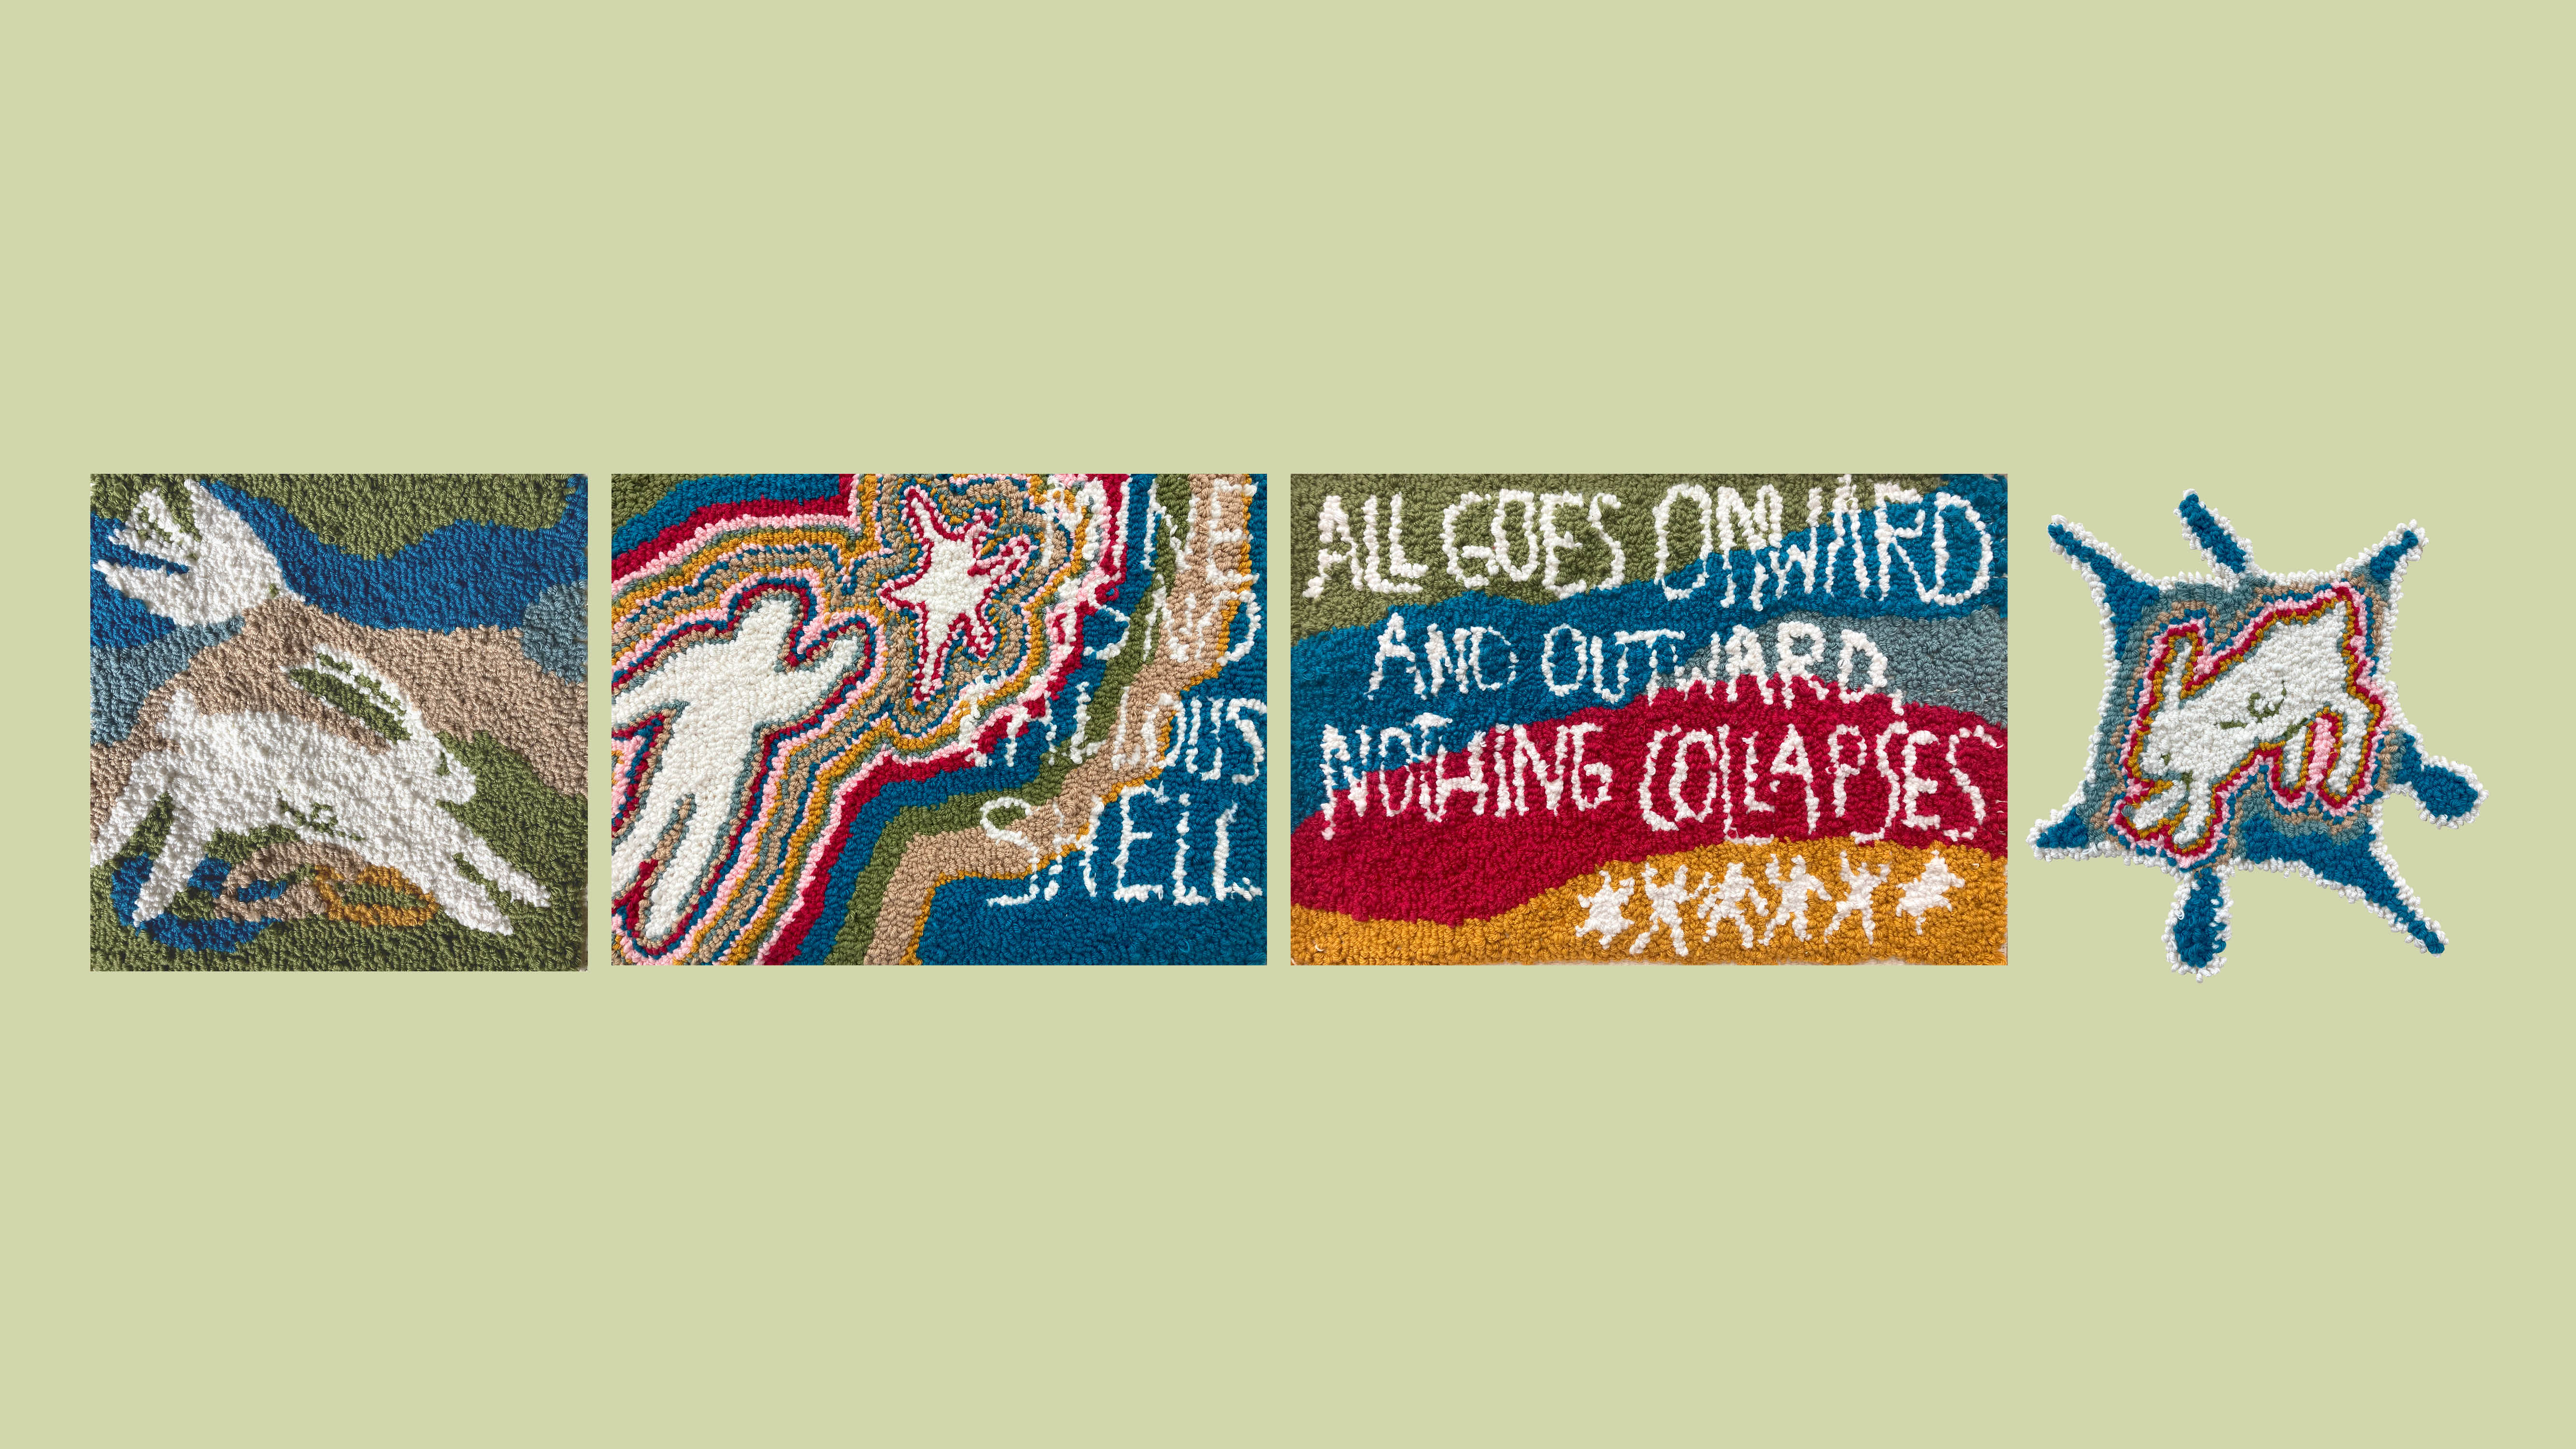 Four punch-needle rugs by Victoria Reeves in various formats showing abstract shapes and figures, combined with quotes from Whitman's 1855 poem Song of Myself.